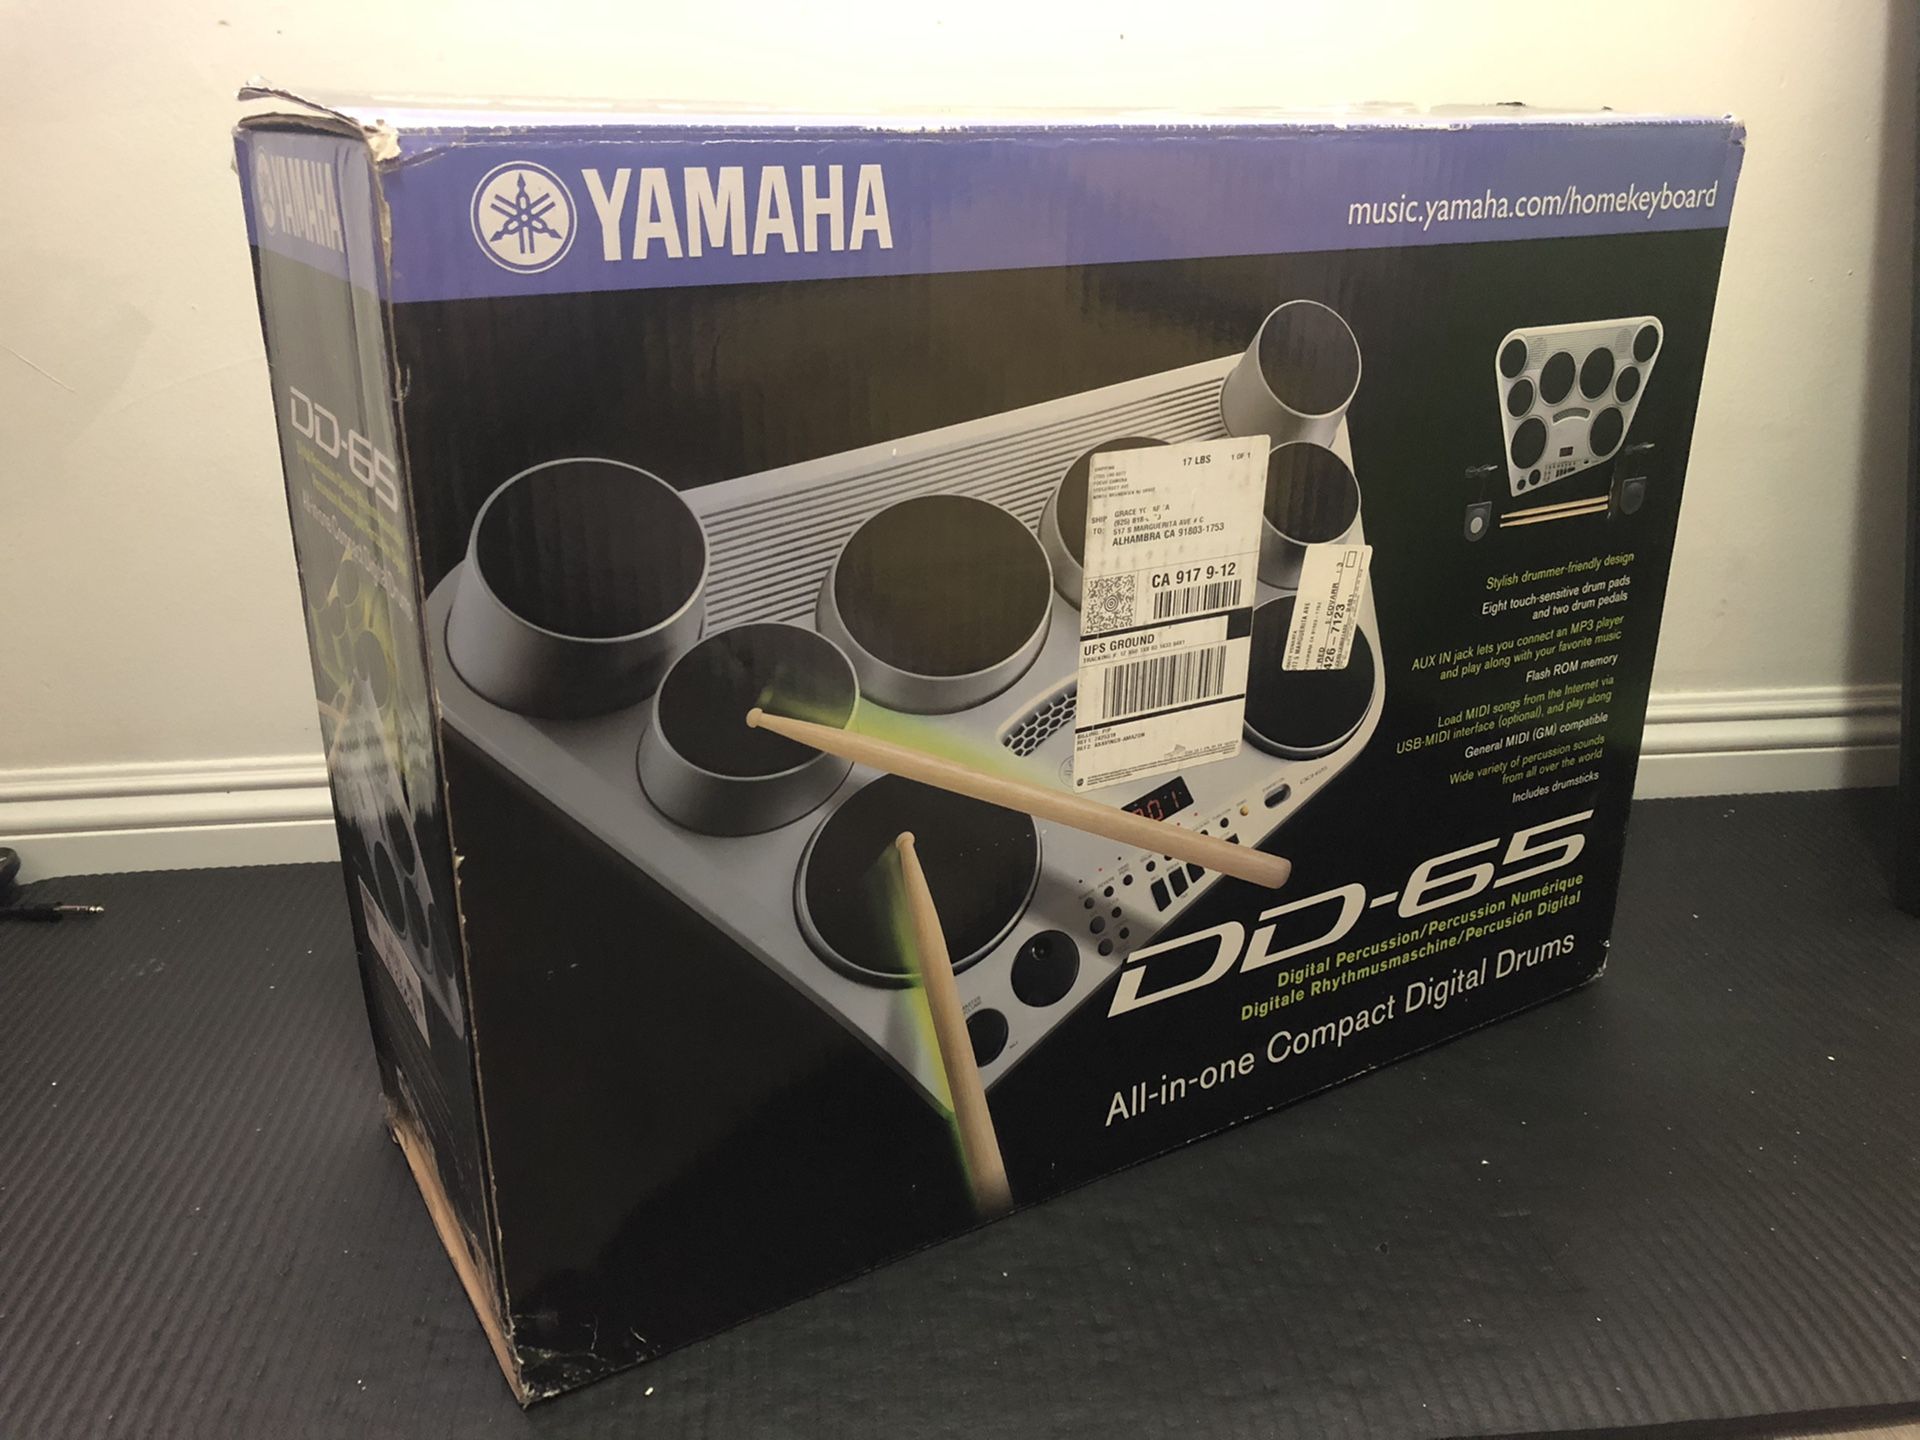 Yamaha DD-65 Portable Digital Drum Kit with Foot Pedals and Drum Sticks